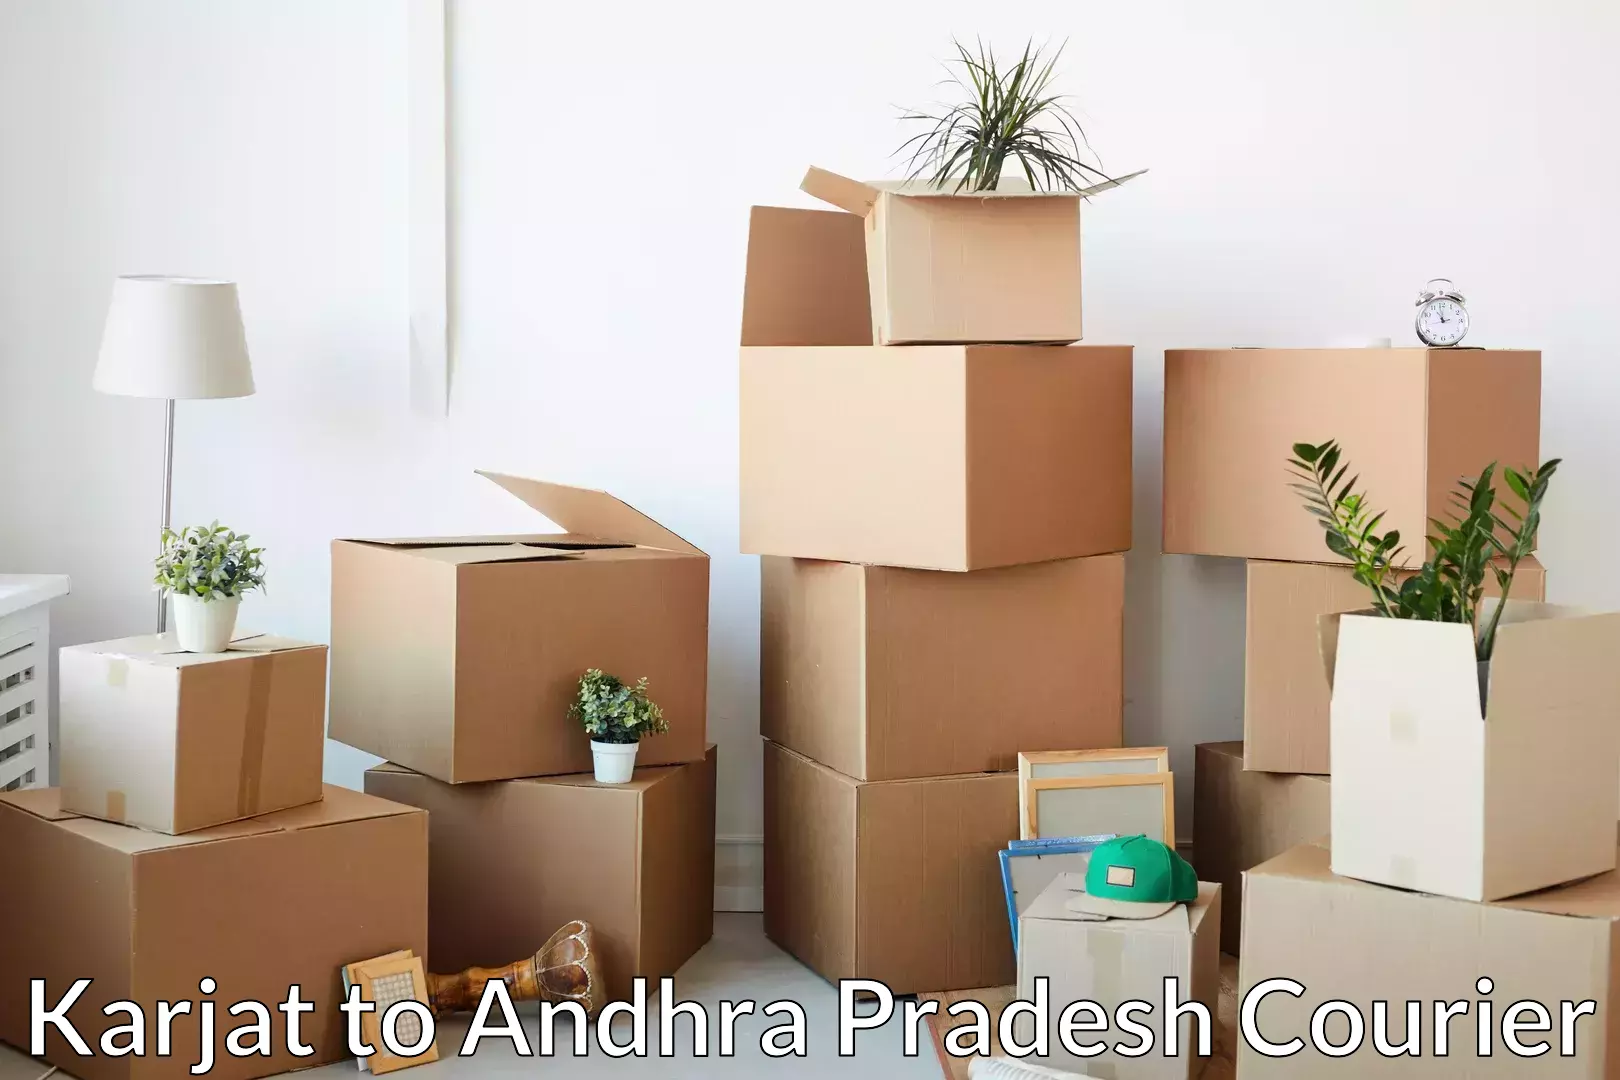 High-quality moving services in Karjat to Chodavaram